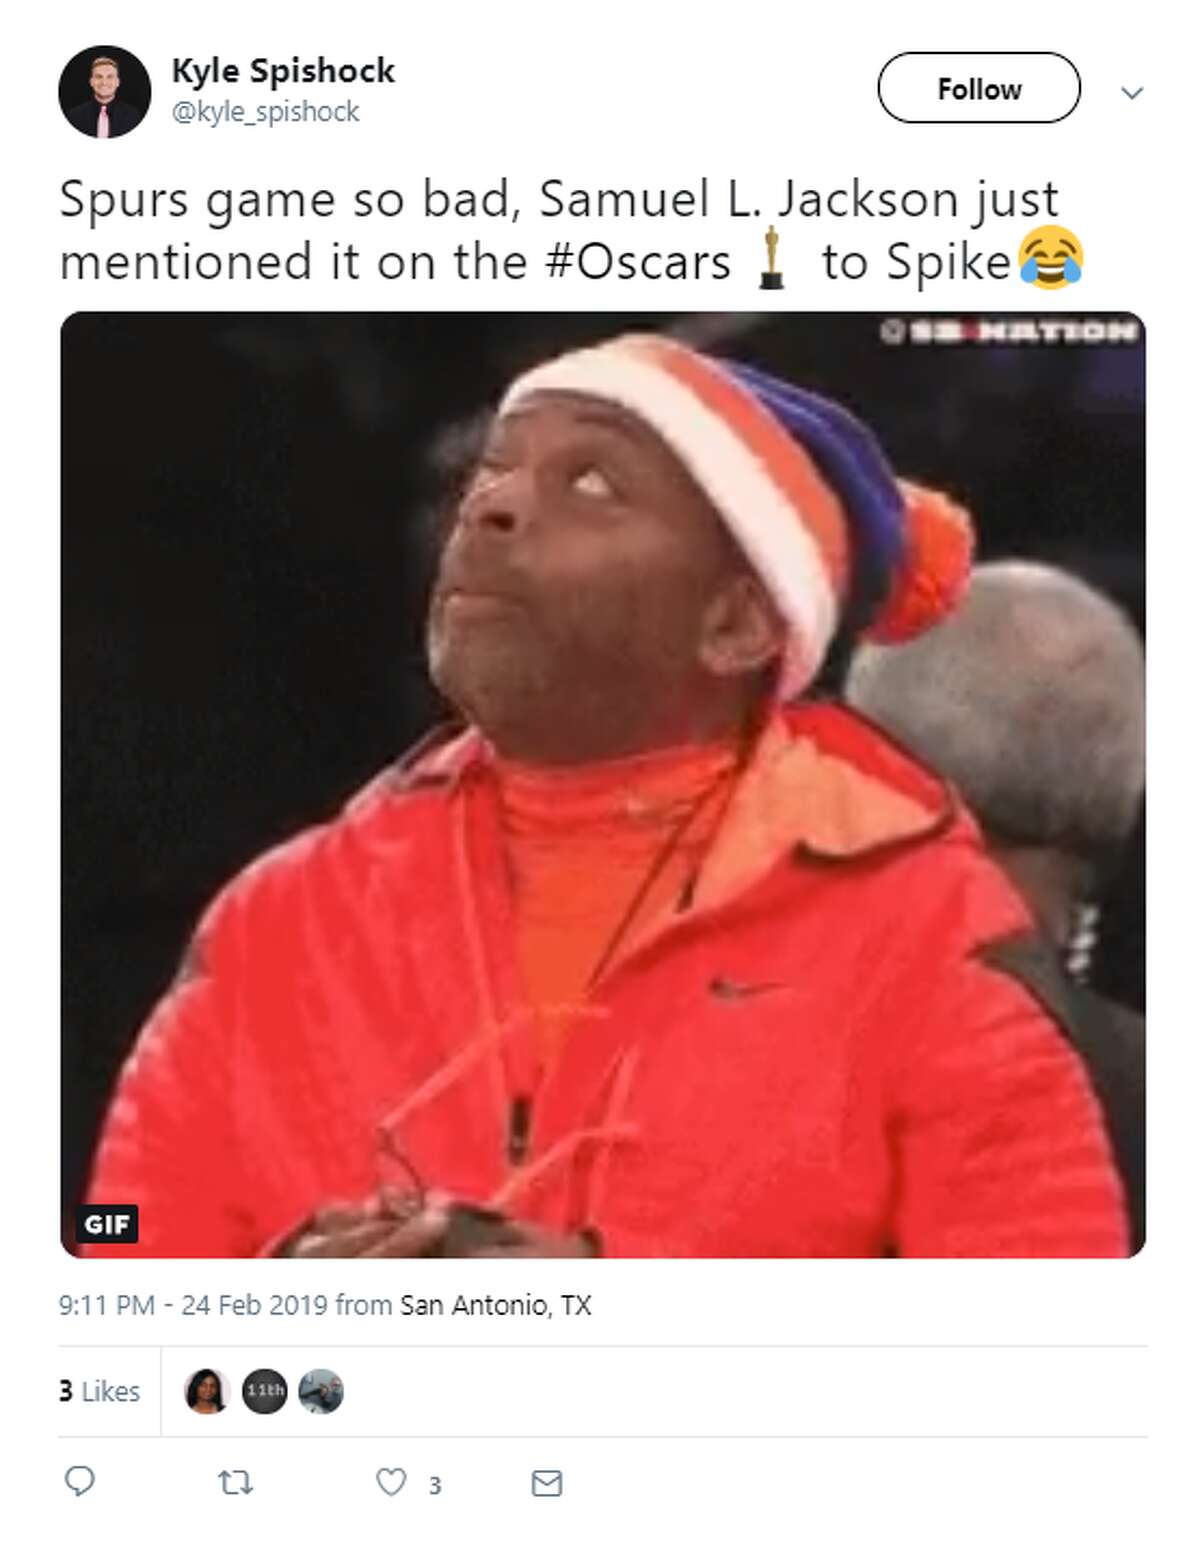 Twitter reacted to Samuel L. Jackson calling out the Spurs' loss to the Knicks at the 2019 Academy Awards.